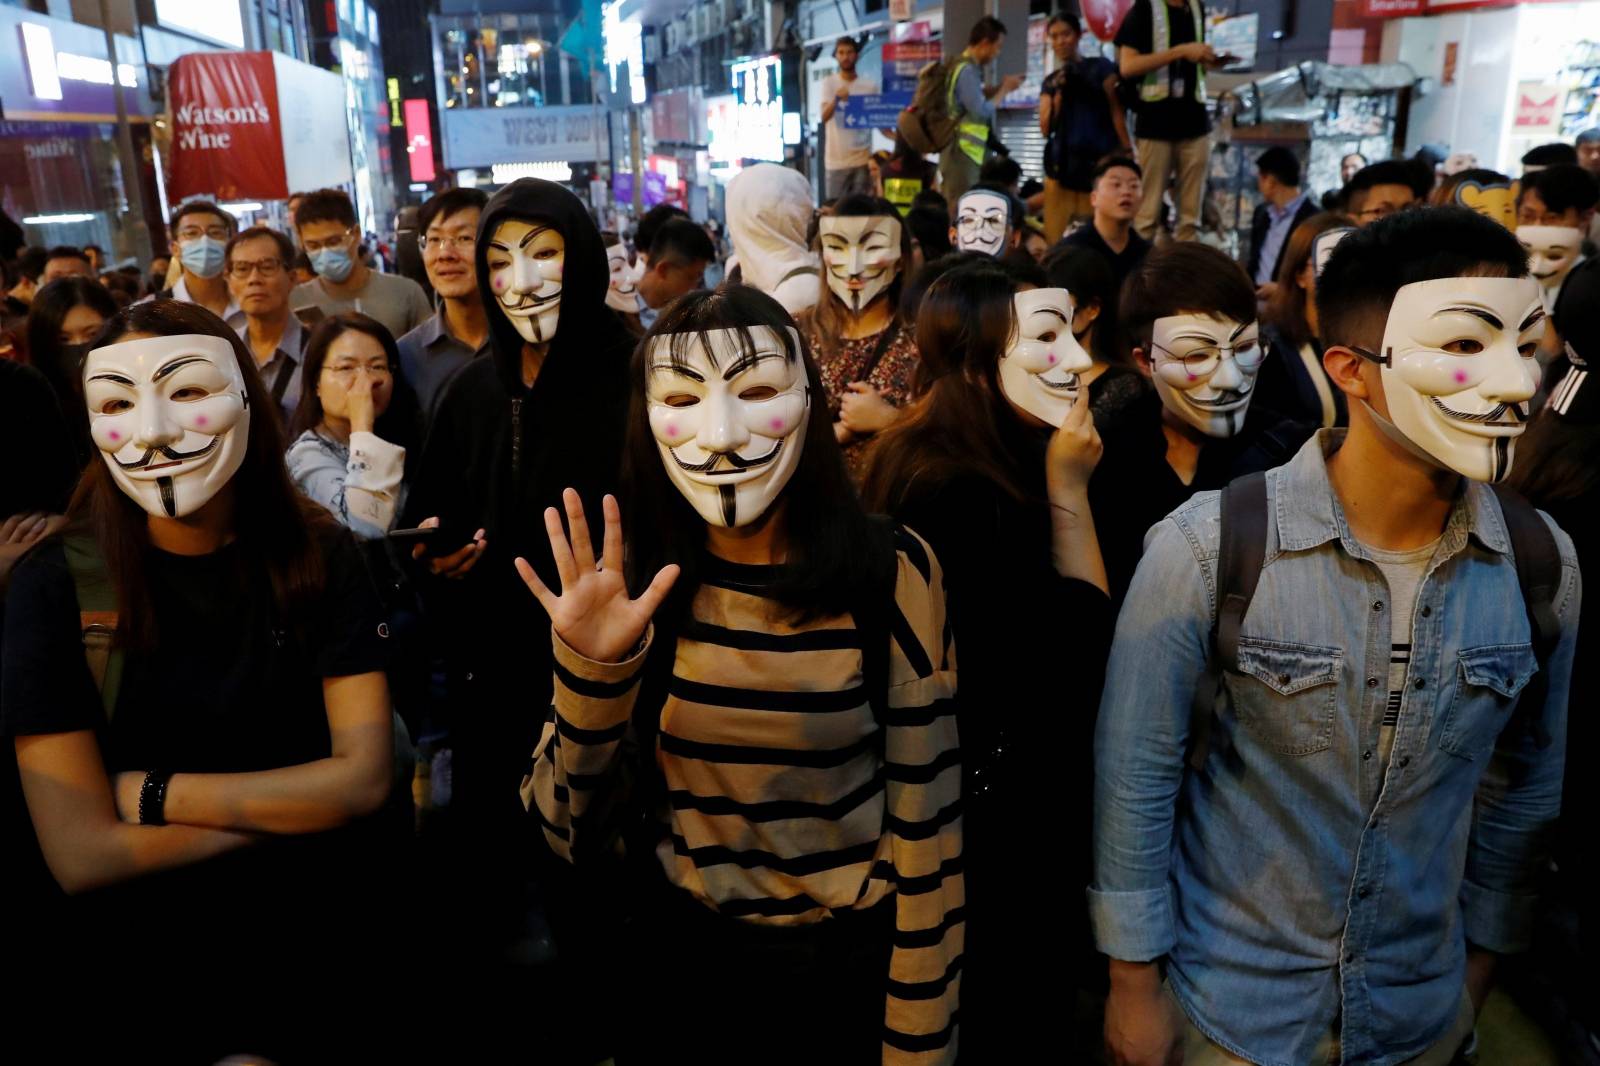 Anti-government protesters wear Guy Fawkes masks during a Halloween march in Lan Kwai Fong, Central district, Hong Kong